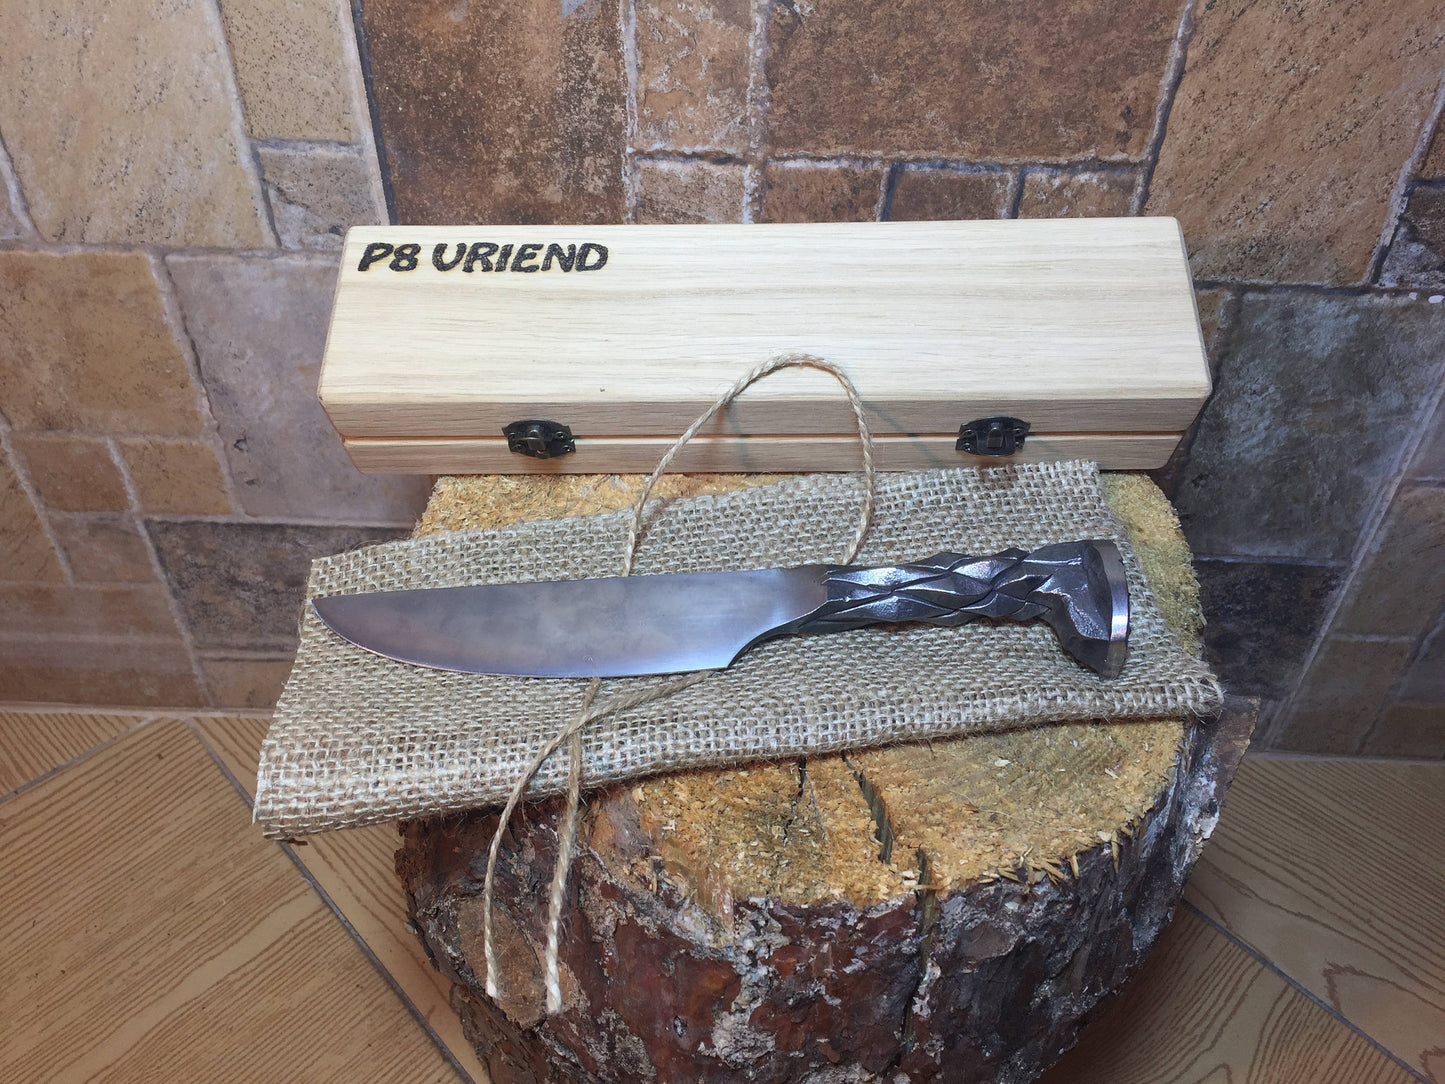 Railroad spike knife in engraved casket/wooden box, iron gift, hunting knife,engraved knife,personalized iron gift,gift for hunter,mens gift